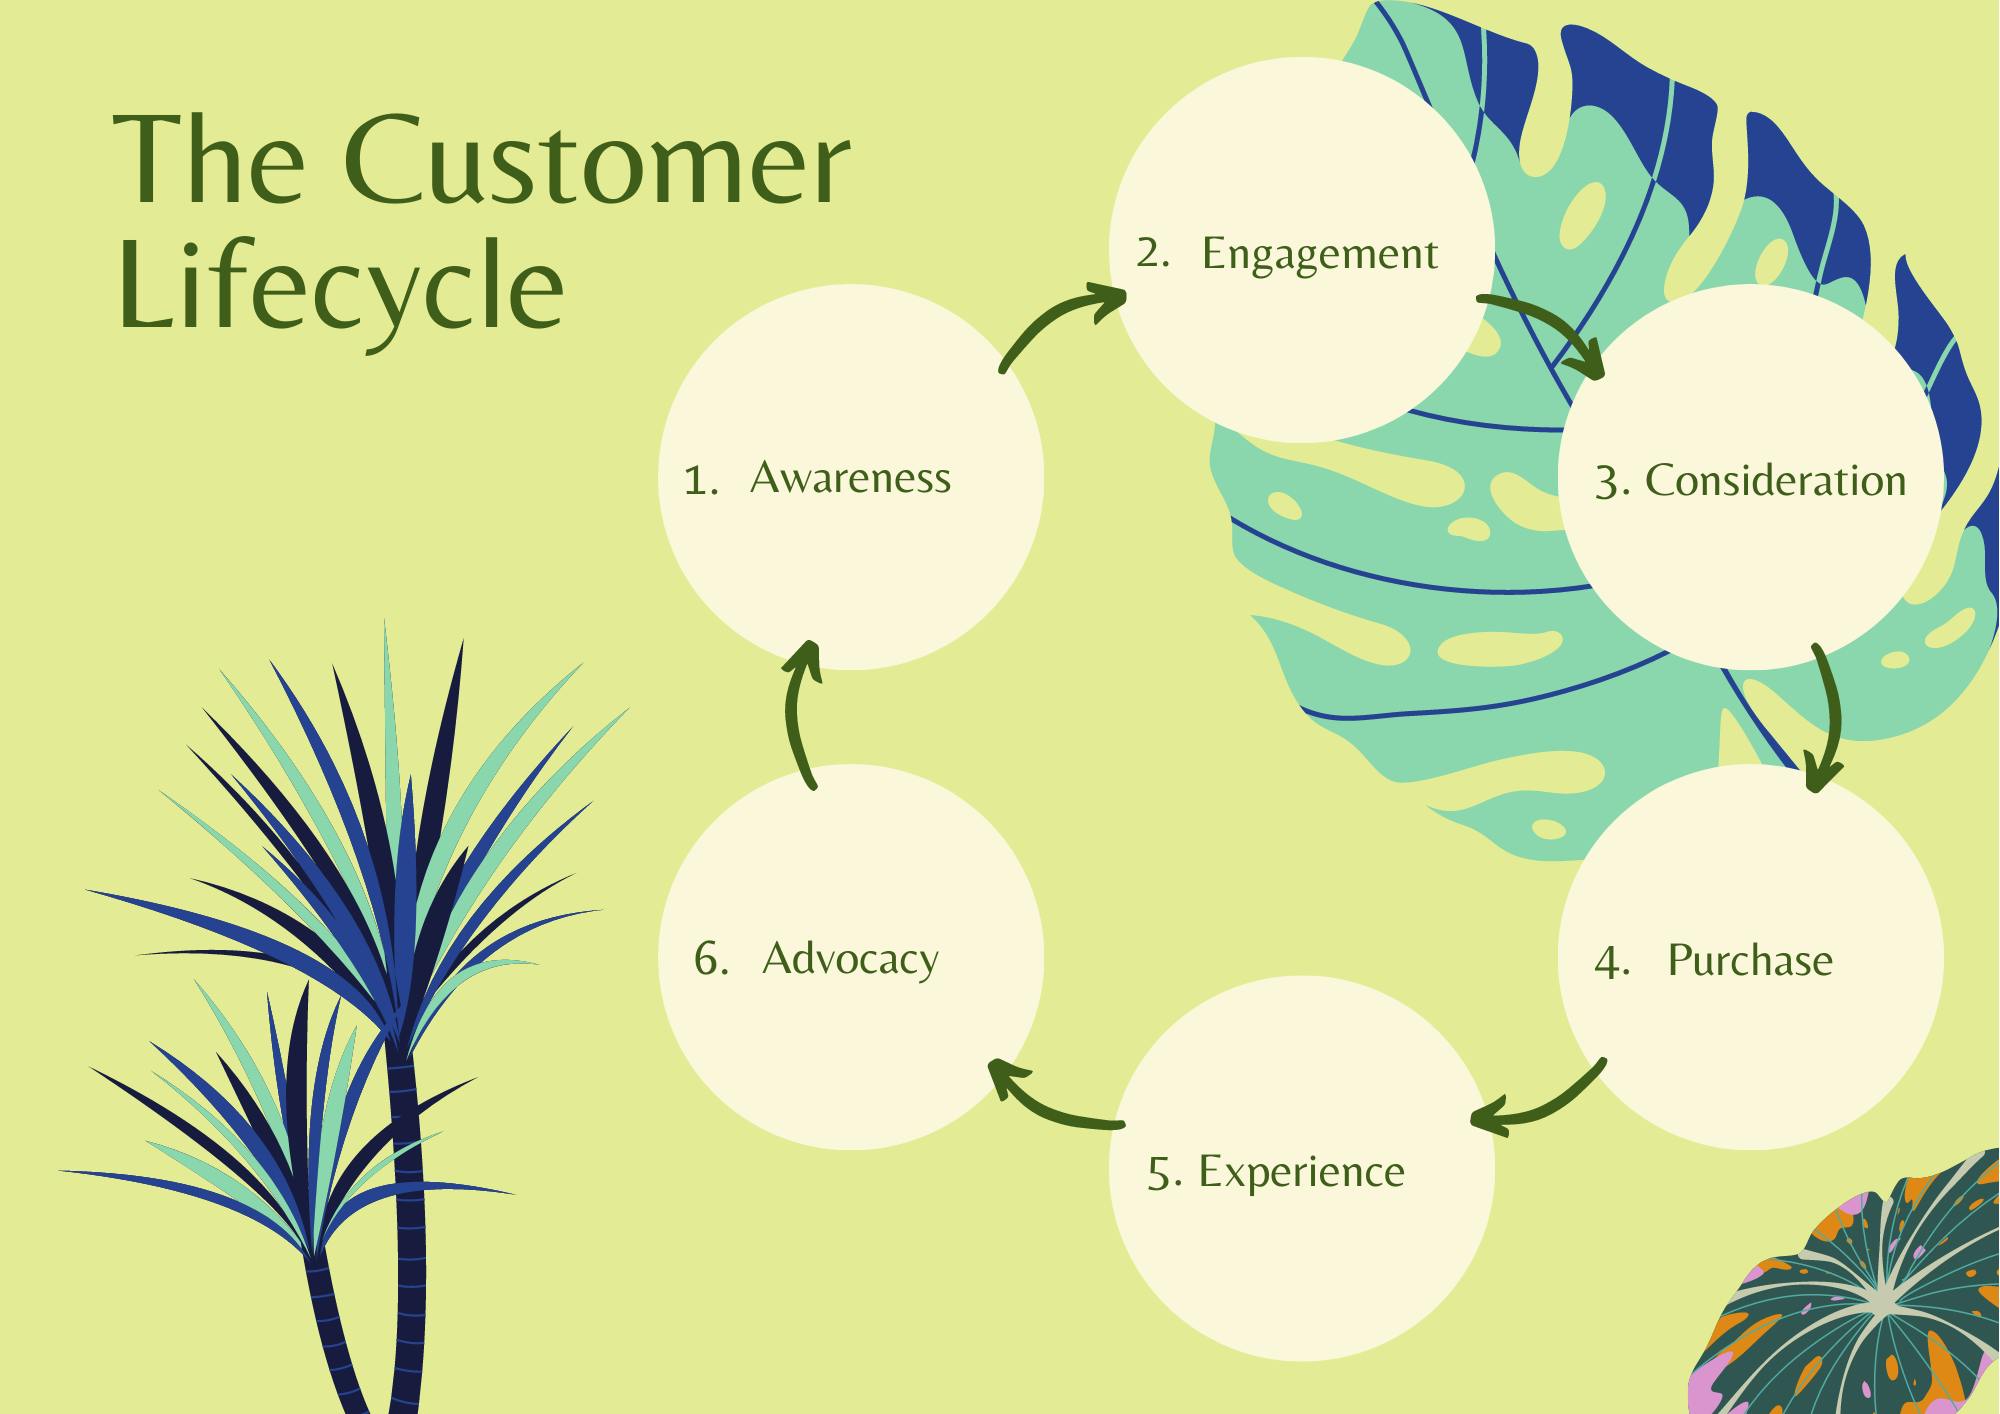 customer life cycle infographic showing 6 stages from awareness to advocacy